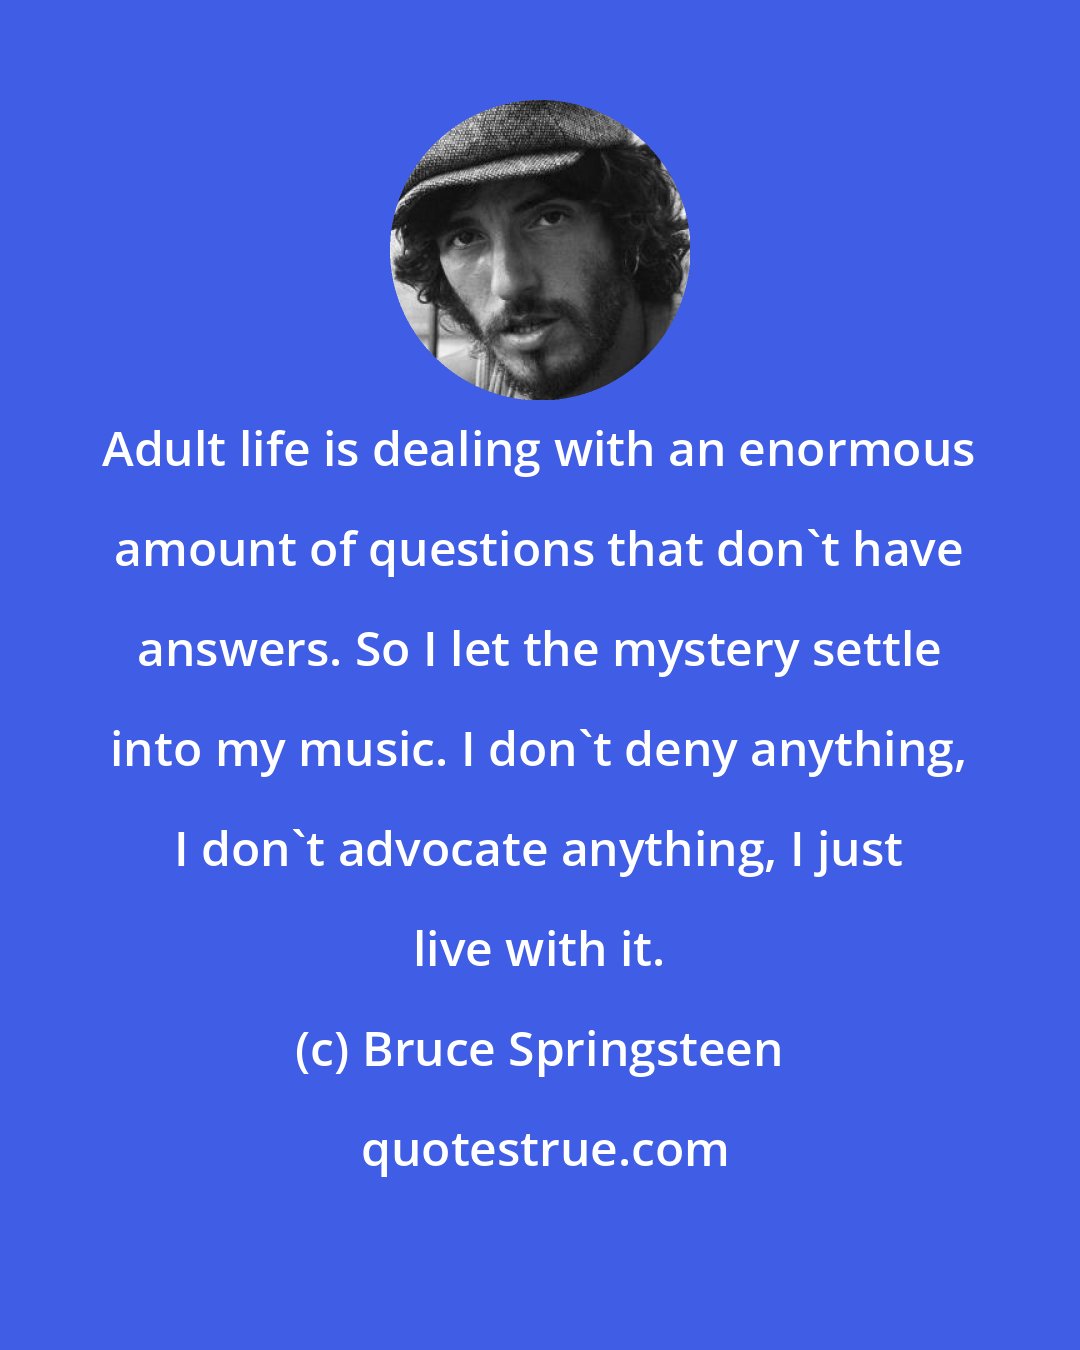 Bruce Springsteen: Adult life is dealing with an enormous amount of questions that don't have answers. So I let the mystery settle into my music. I don't deny anything, I don't advocate anything, I just live with it.